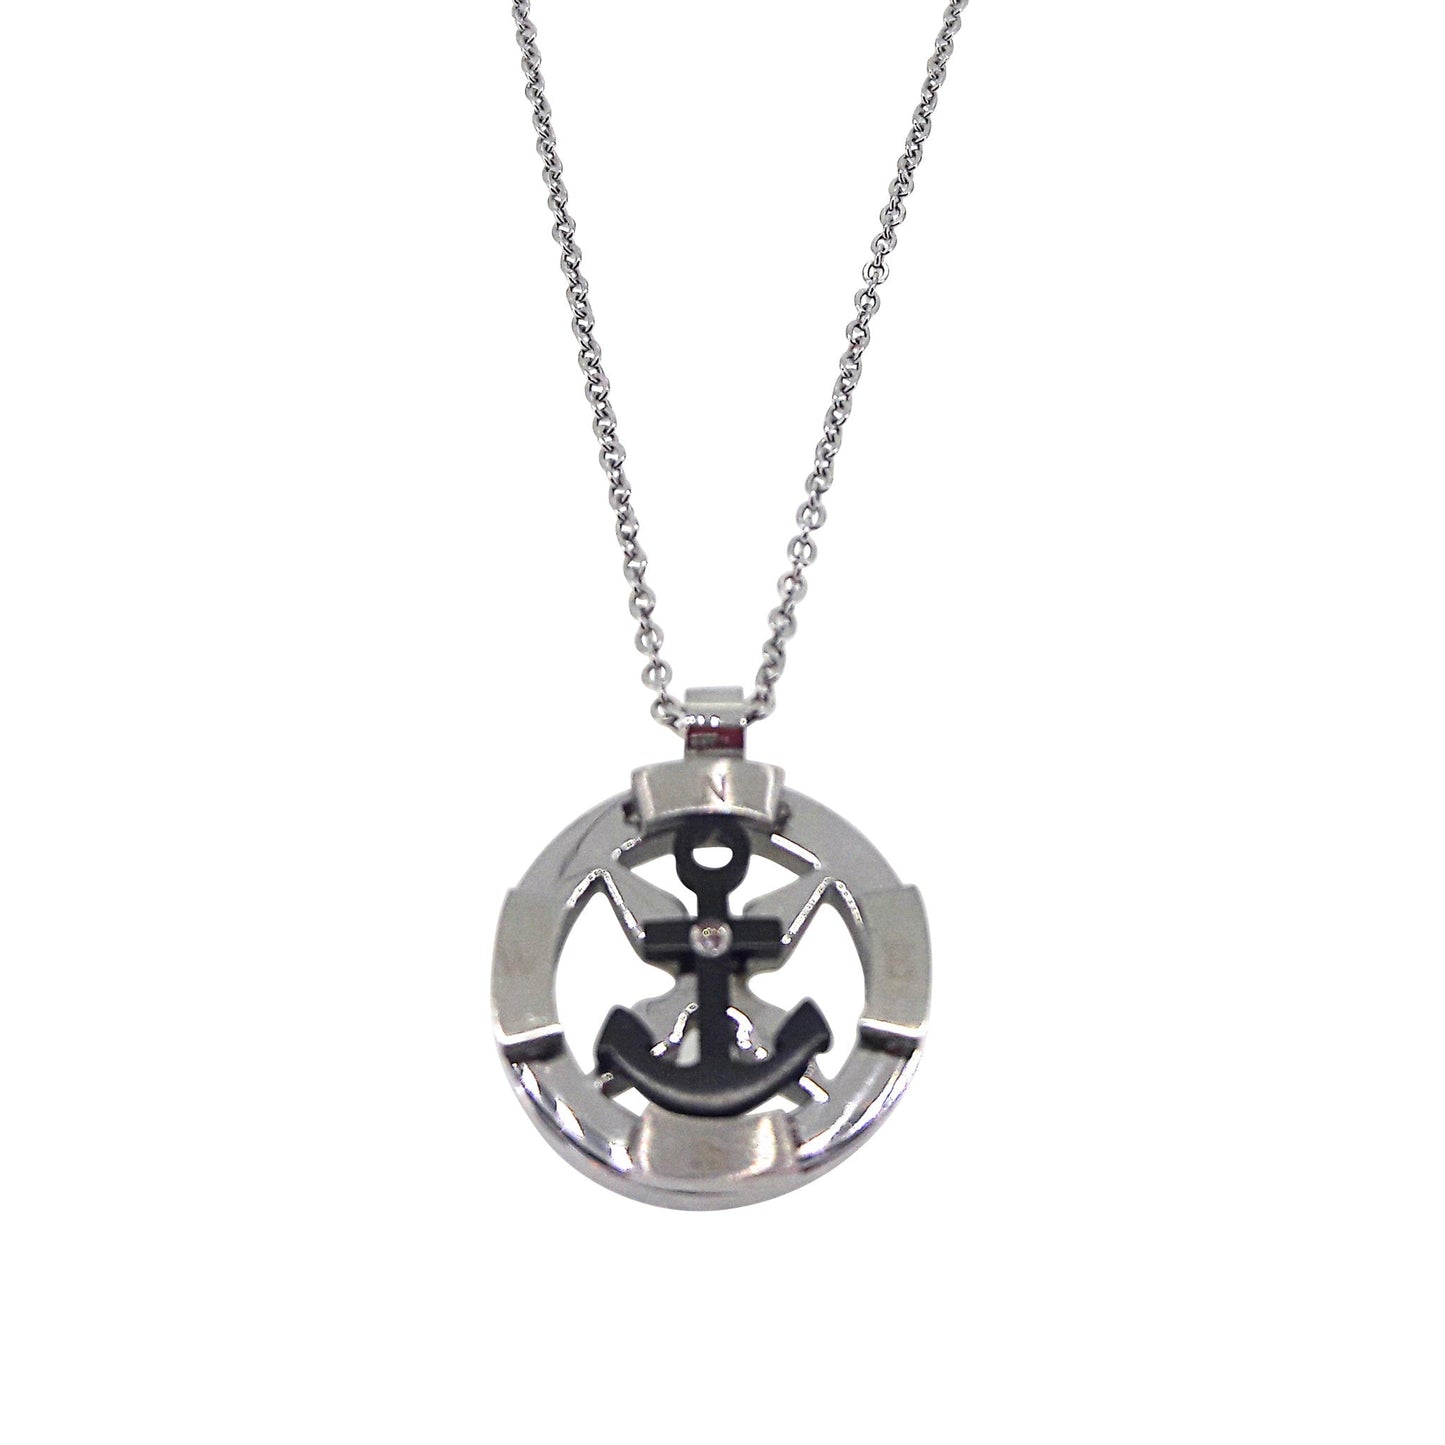 A stainless steel nautical compass and black anchor with simulated diamond on chain displayed on a neutral white background.